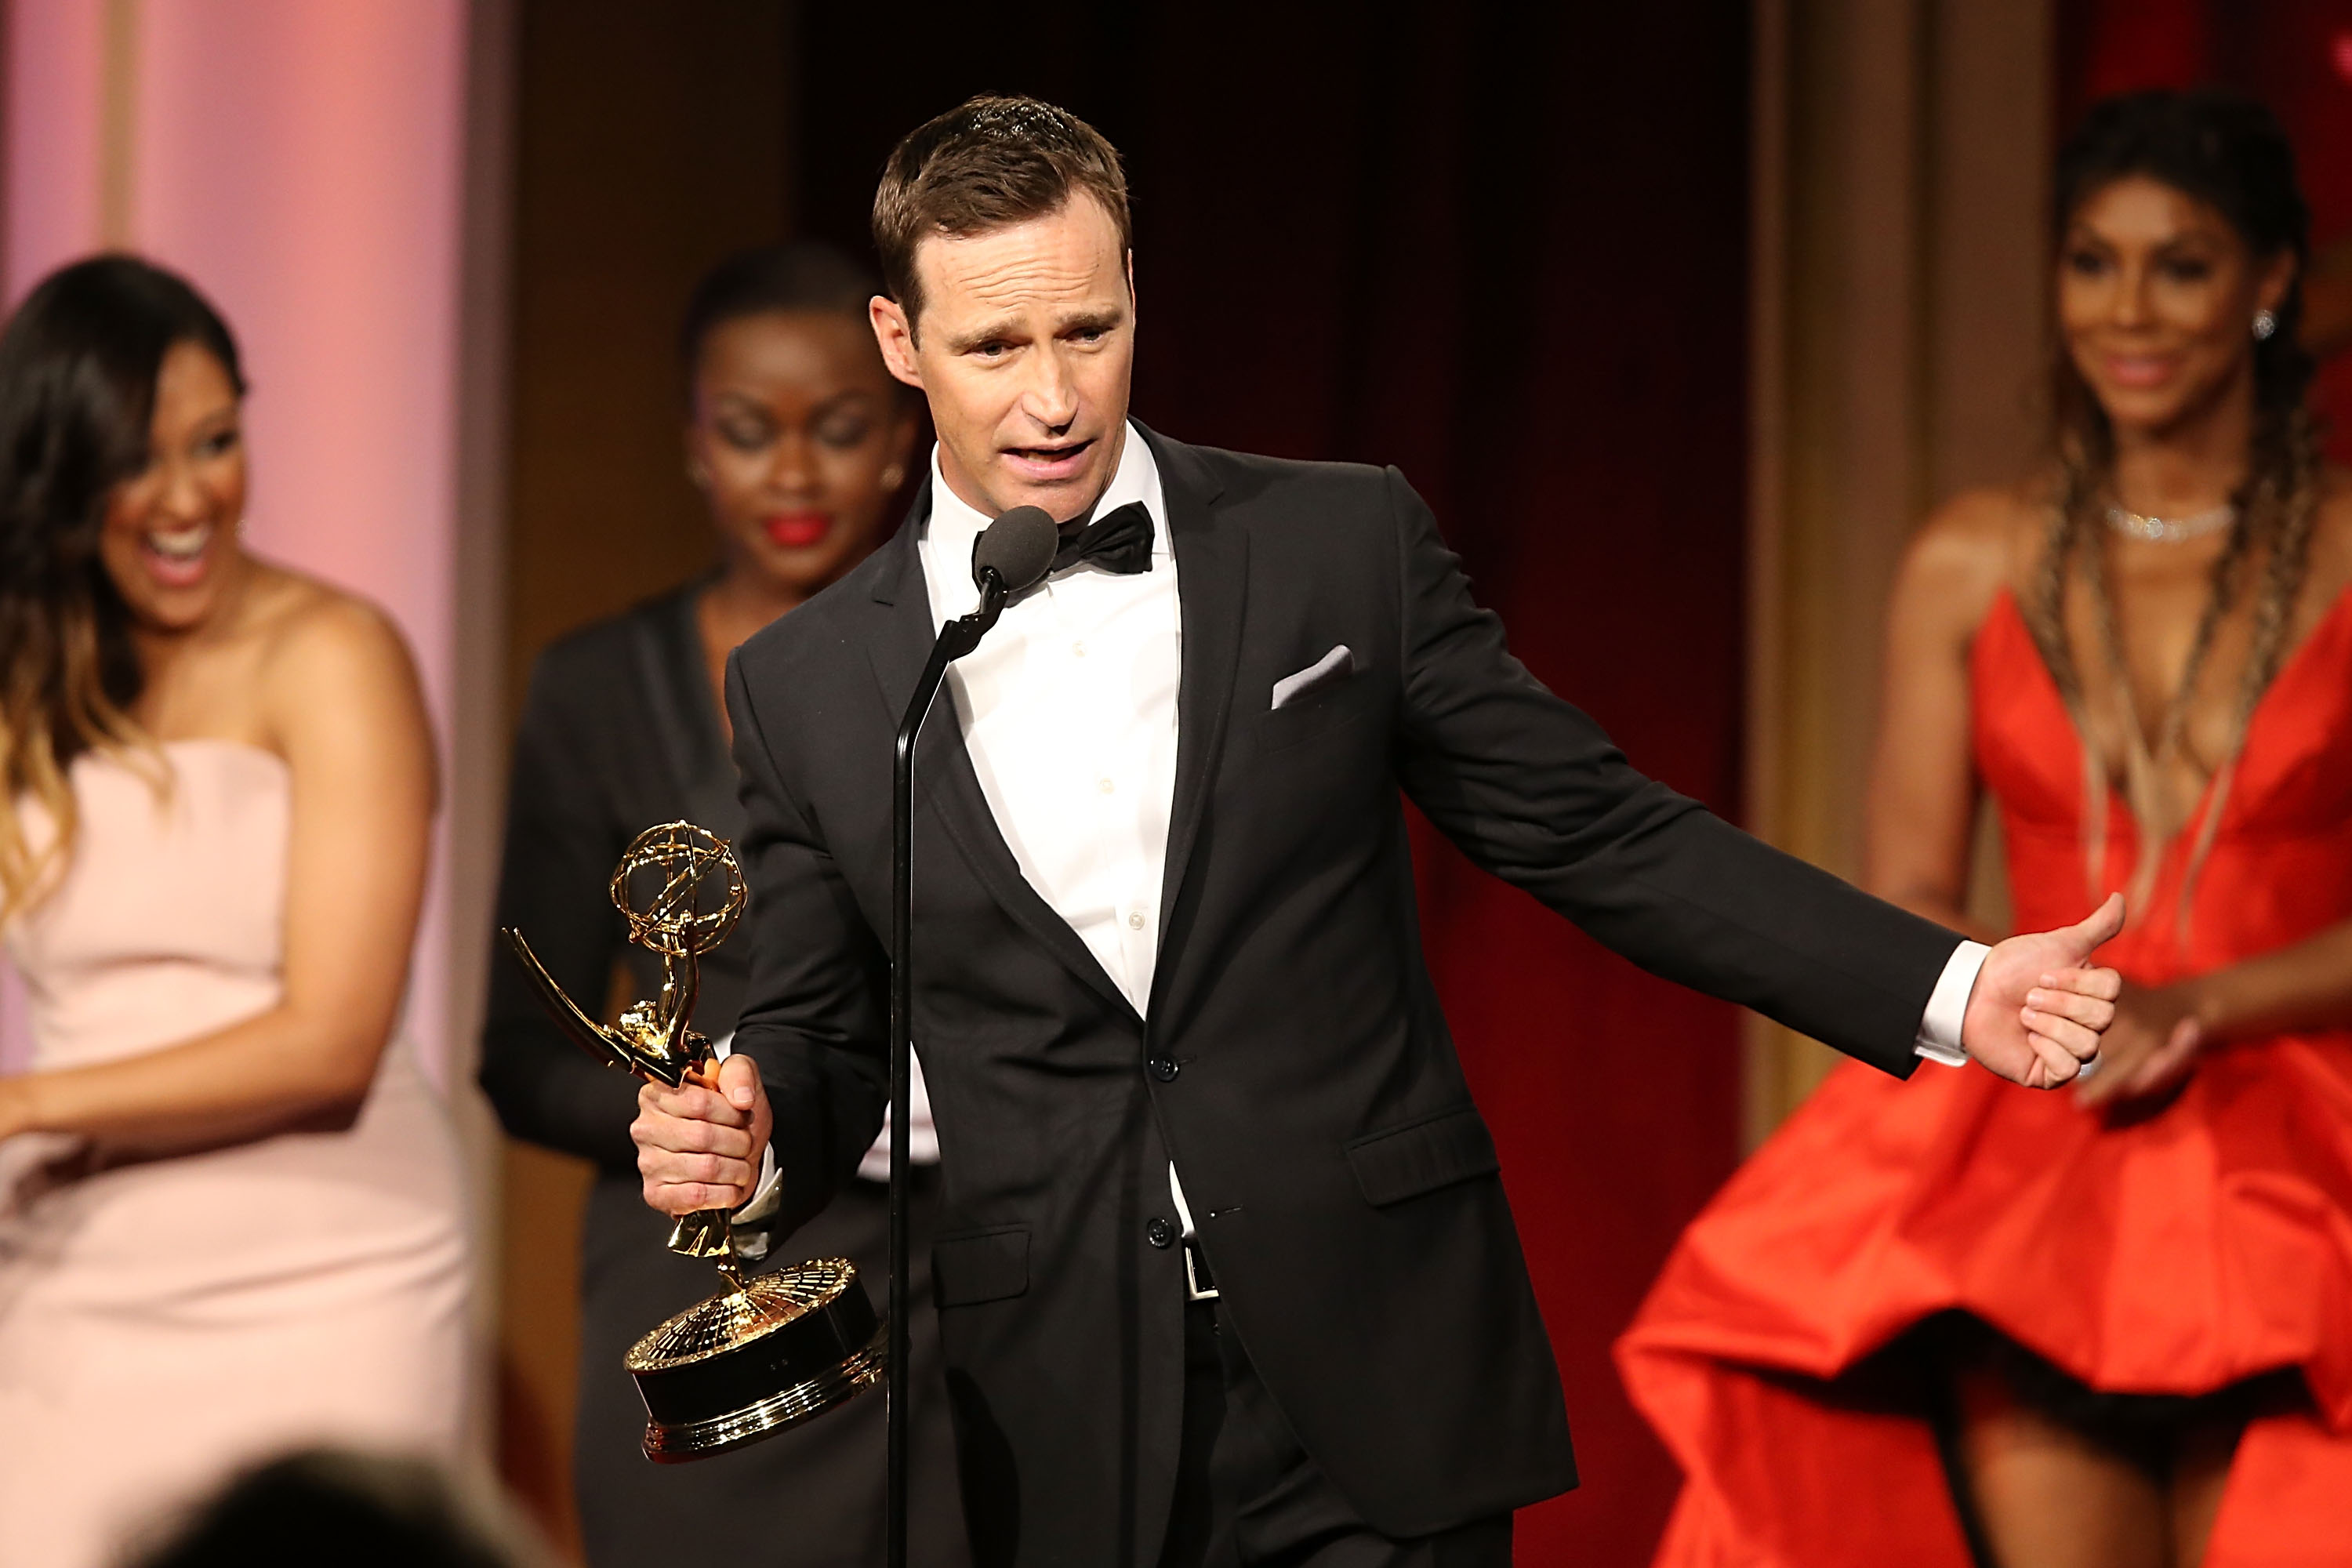 Mike Richards accepts the award for outstanding game show for The Price is Right at the 2016 Daytime Emmy Awards. The producer has been announced as the new host of Jeopardy! but a tainted past including offensive podcast comments have come to light.